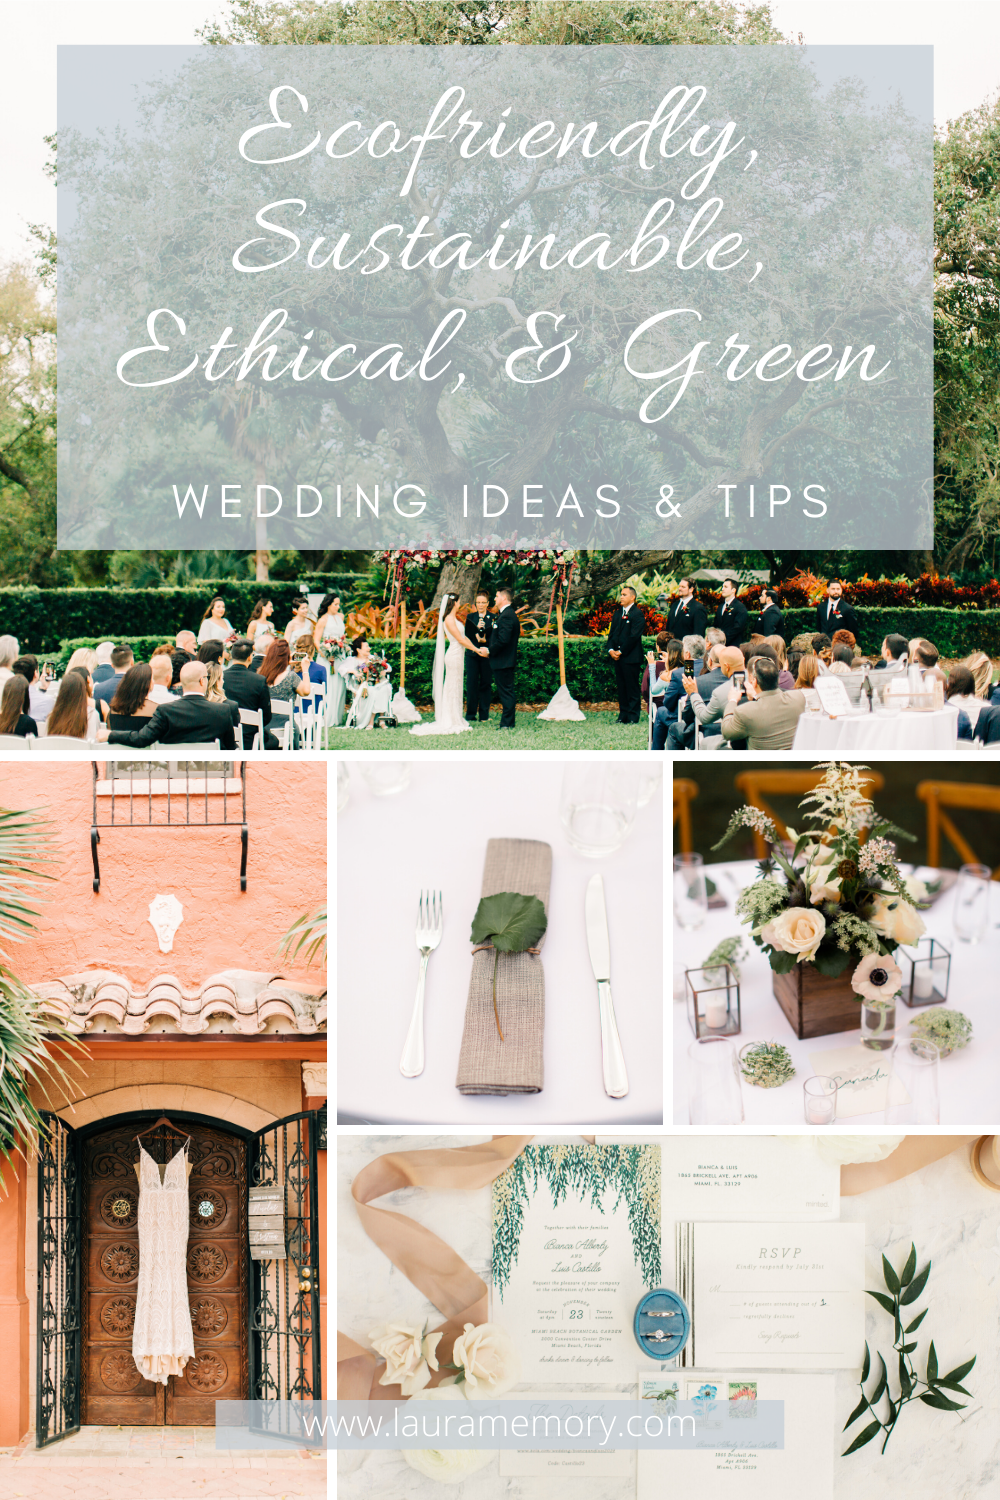 10 Tips To Make Your Wedding Day Eco Friendly | How to Have a Sustainable Wedding | Green Wedding Tips